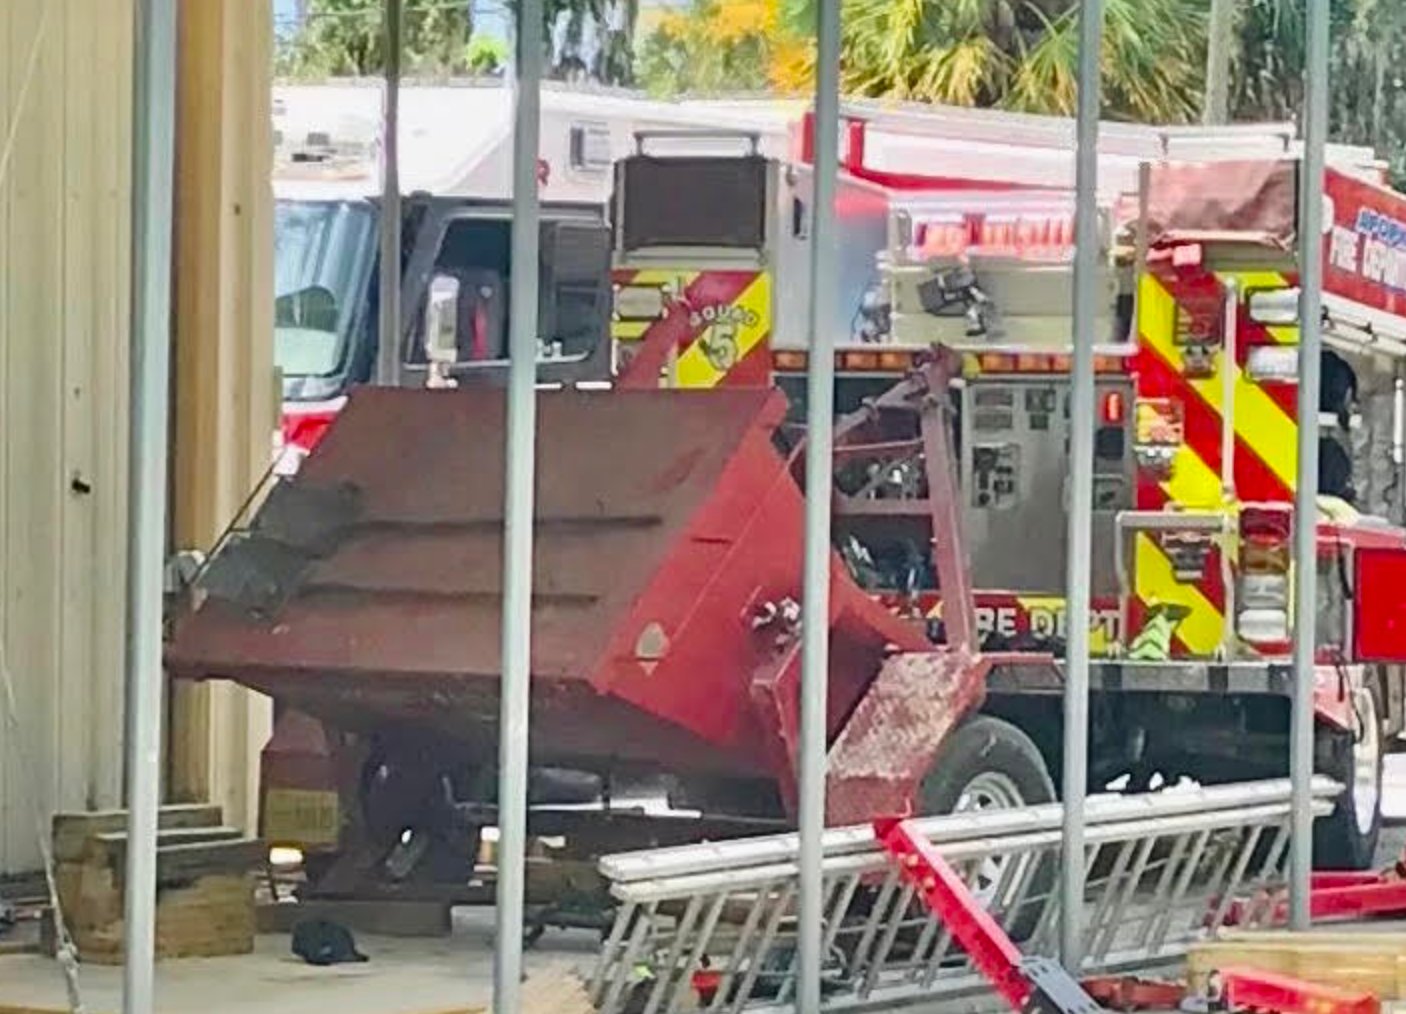 According to multiple sources with knowledge of the incident, the accident happened at APD Fire Station 1 yesterday when two firefighters were disconnecting the jack from a sand trailer. According to sources, the jack was off-center and flipped over onto the firefighter.  